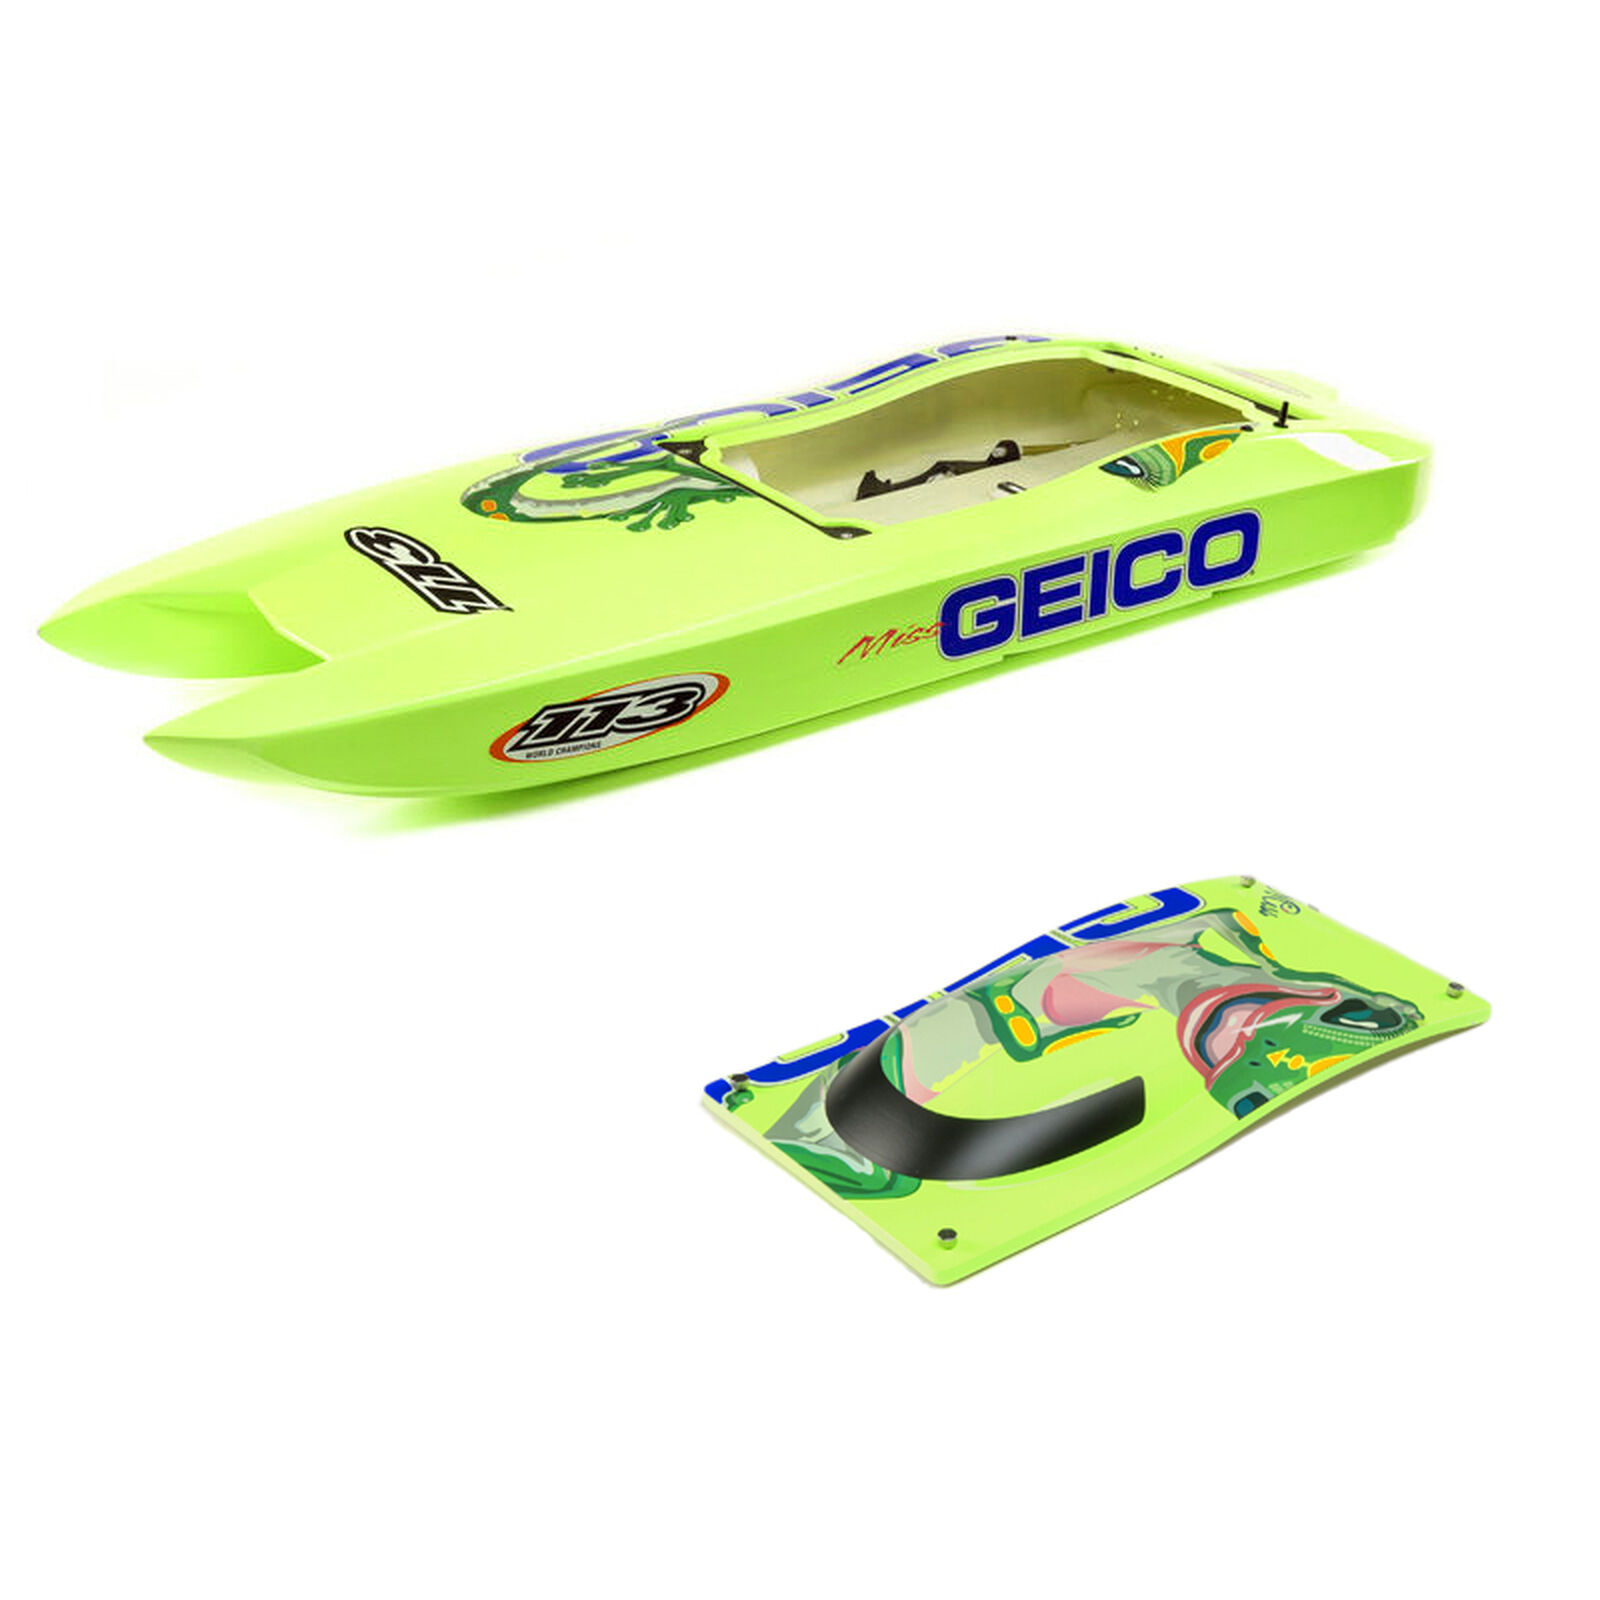 Hull and Canopy Set: Miss Geico 36